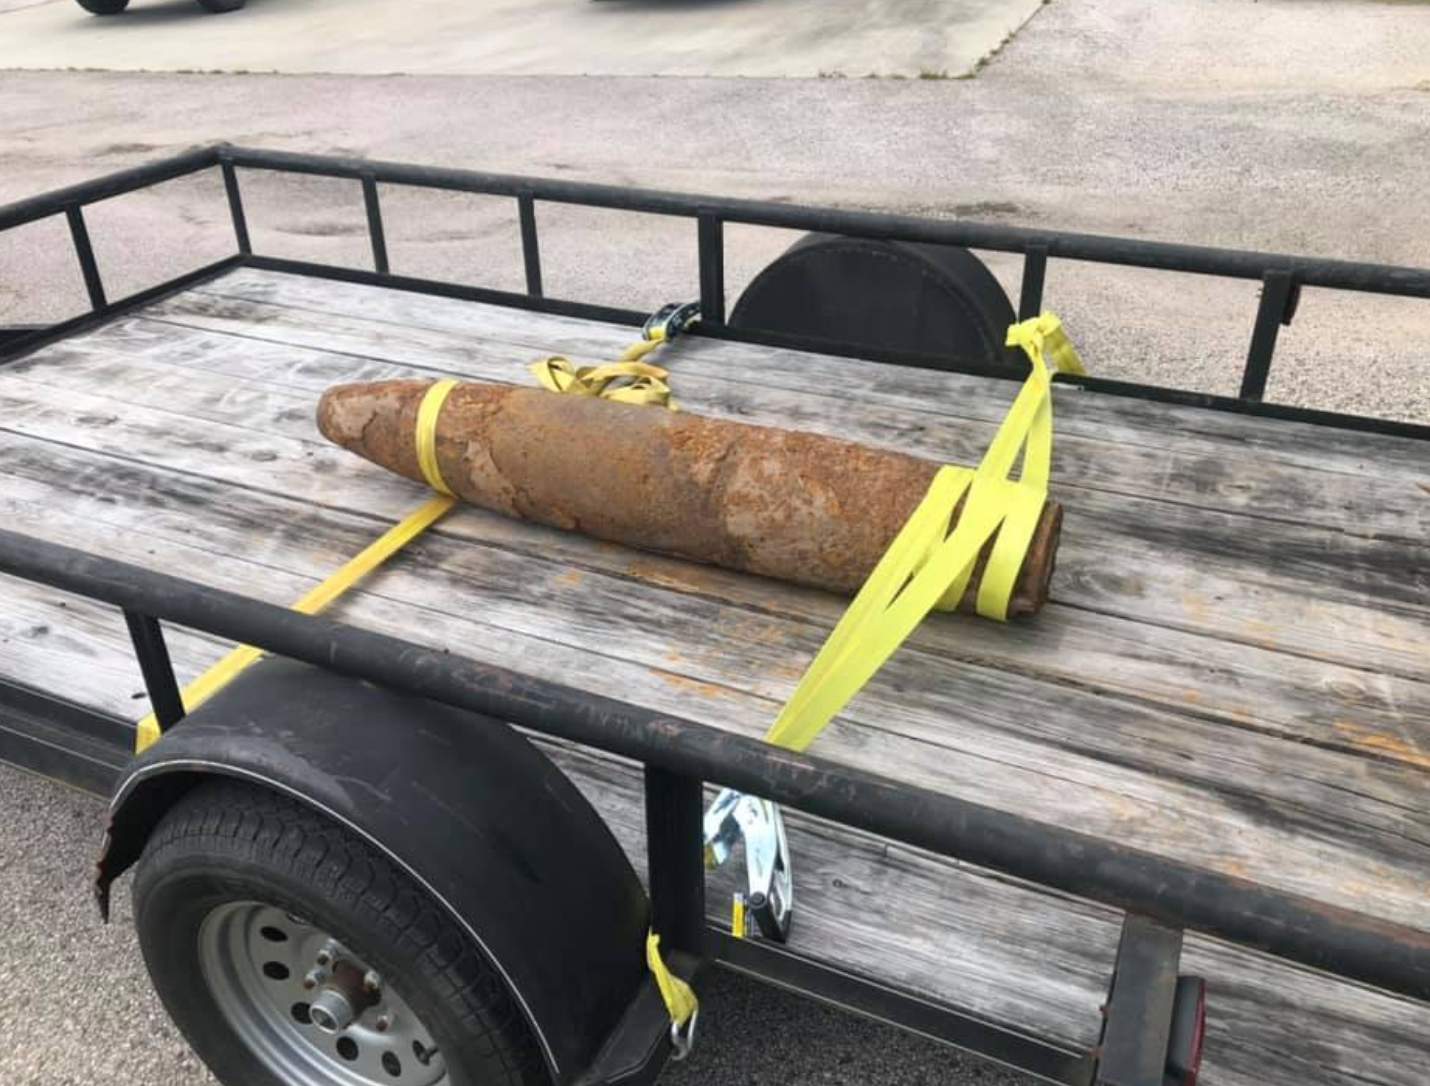 Workers discover large explosive device near Magnolia, Montgomery County Fire Marshal’s Office says